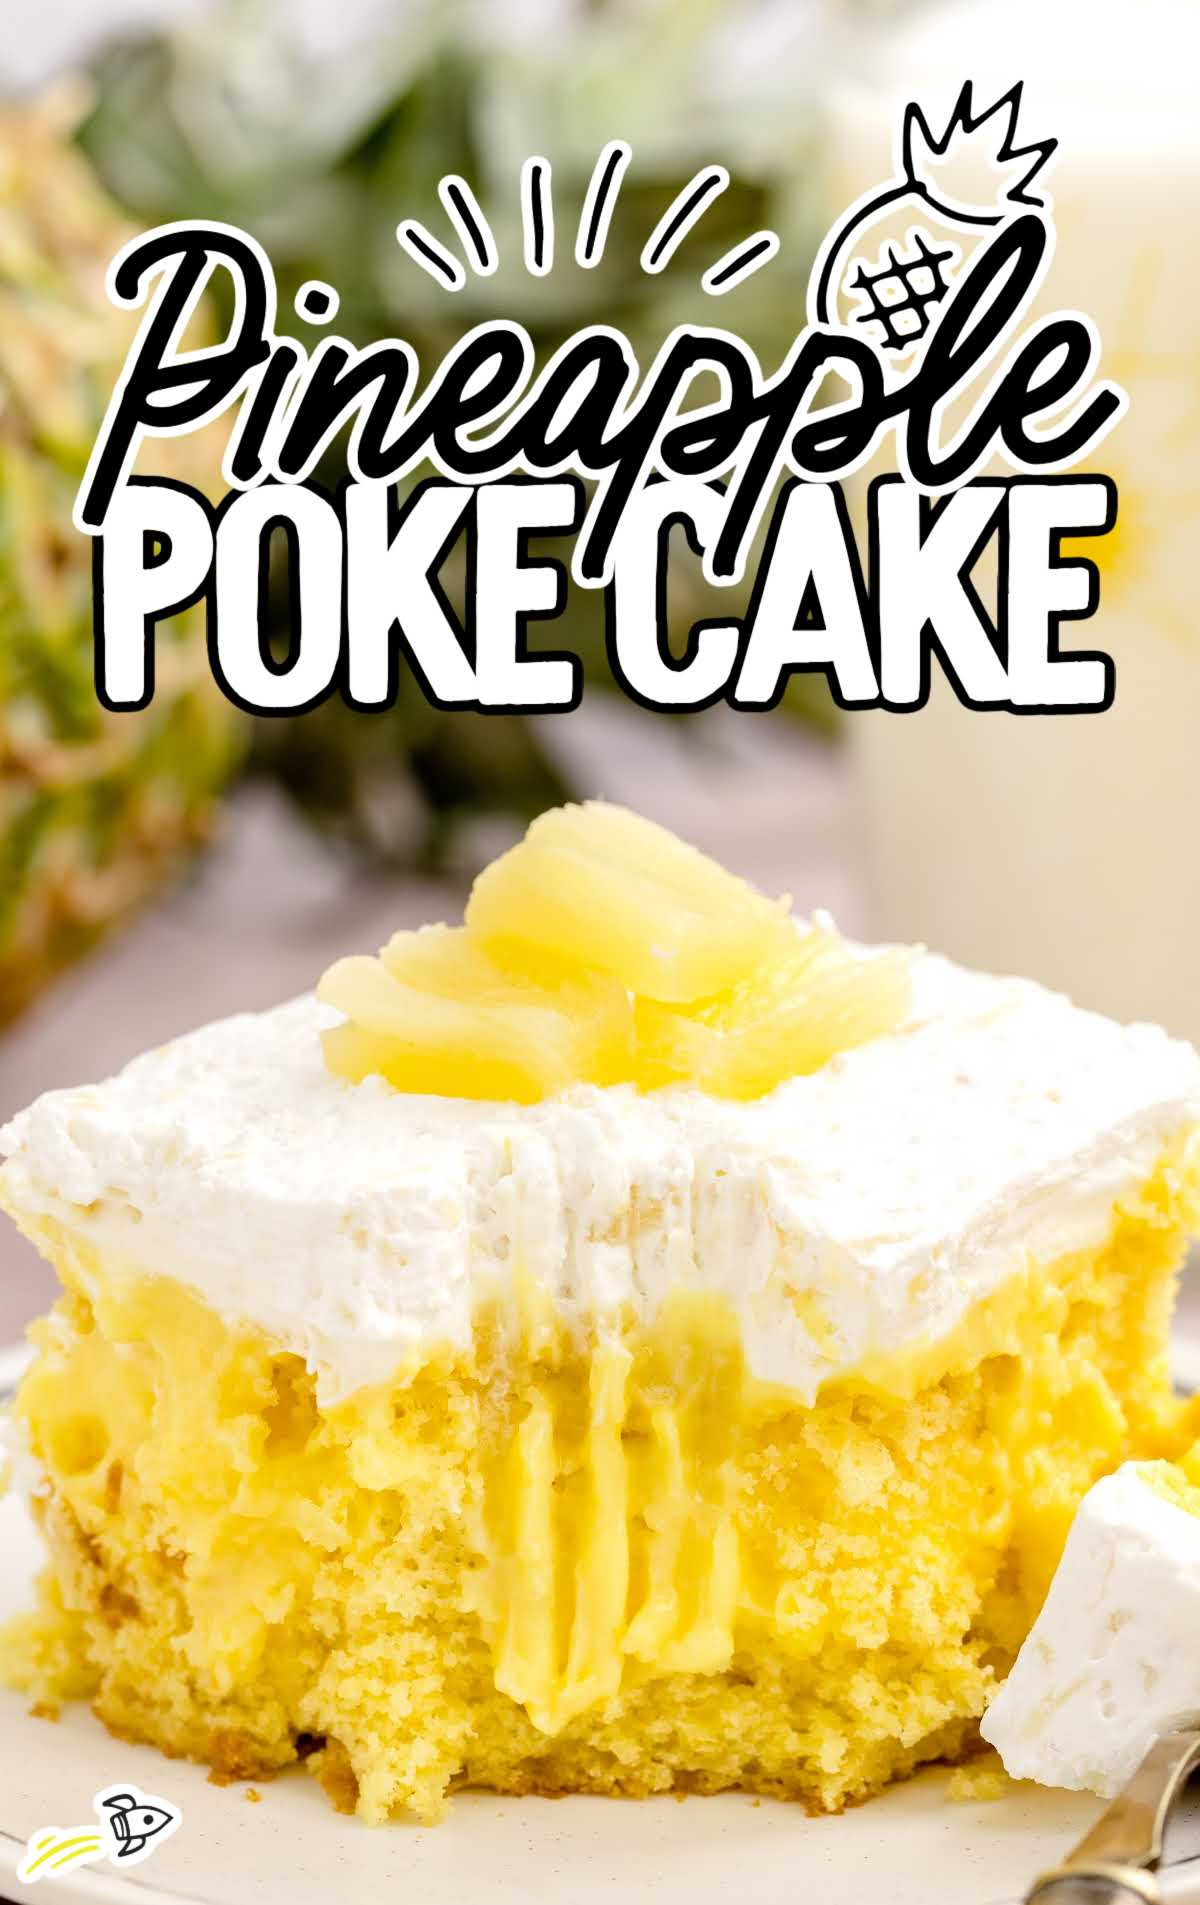 a close-up shot of a slice of Pineapple Poke Cake with a piece taken by a fork